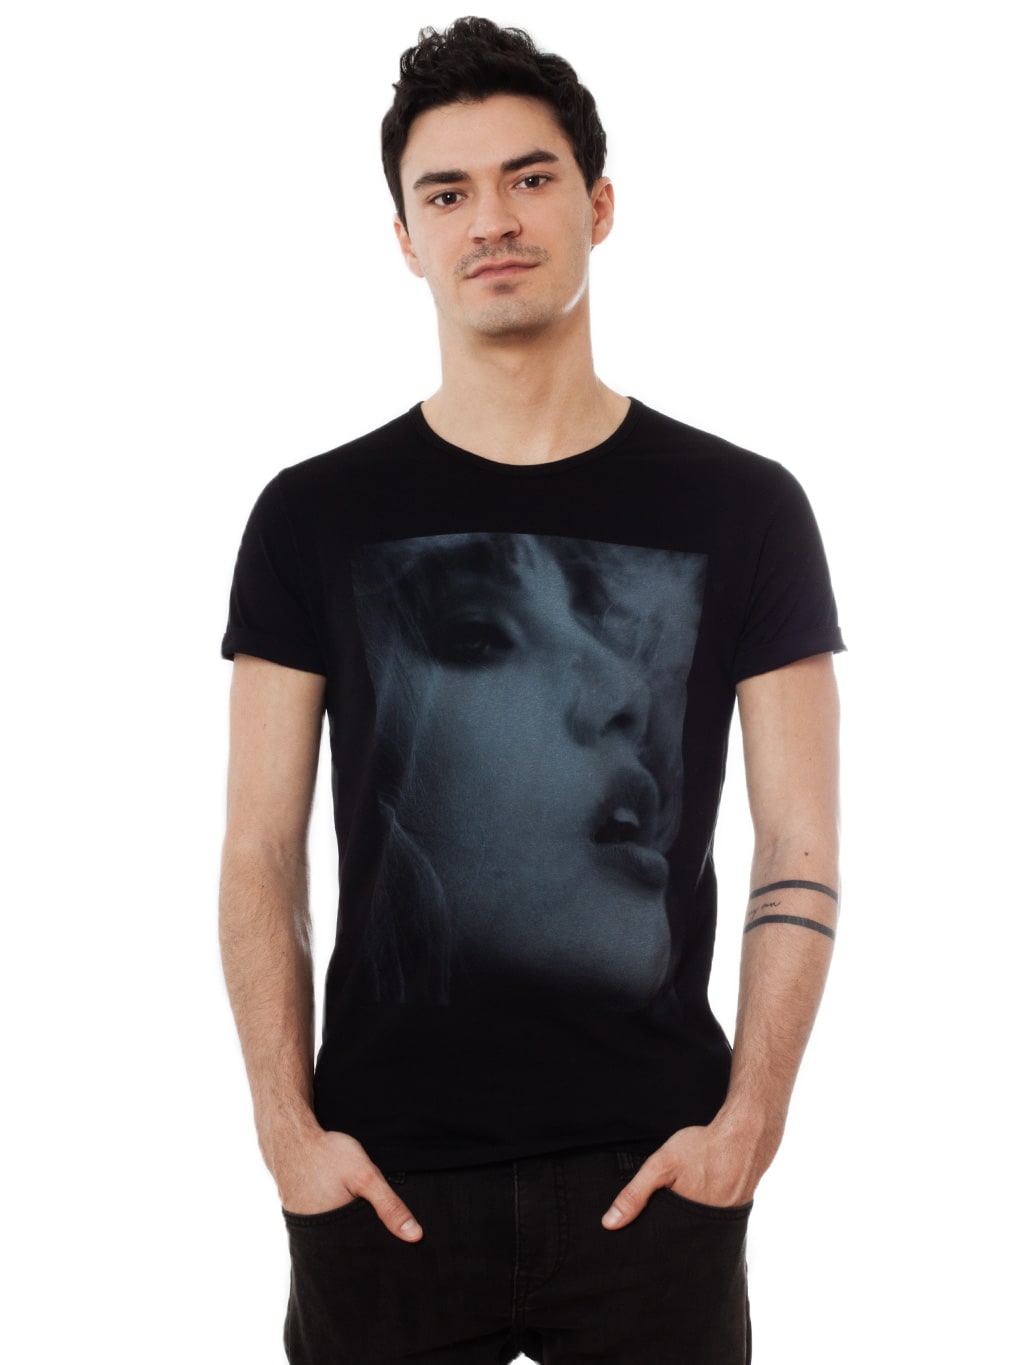 Lina Tesch t-shirt special edition: “Hope, Desire & Passion” [Submitted ...